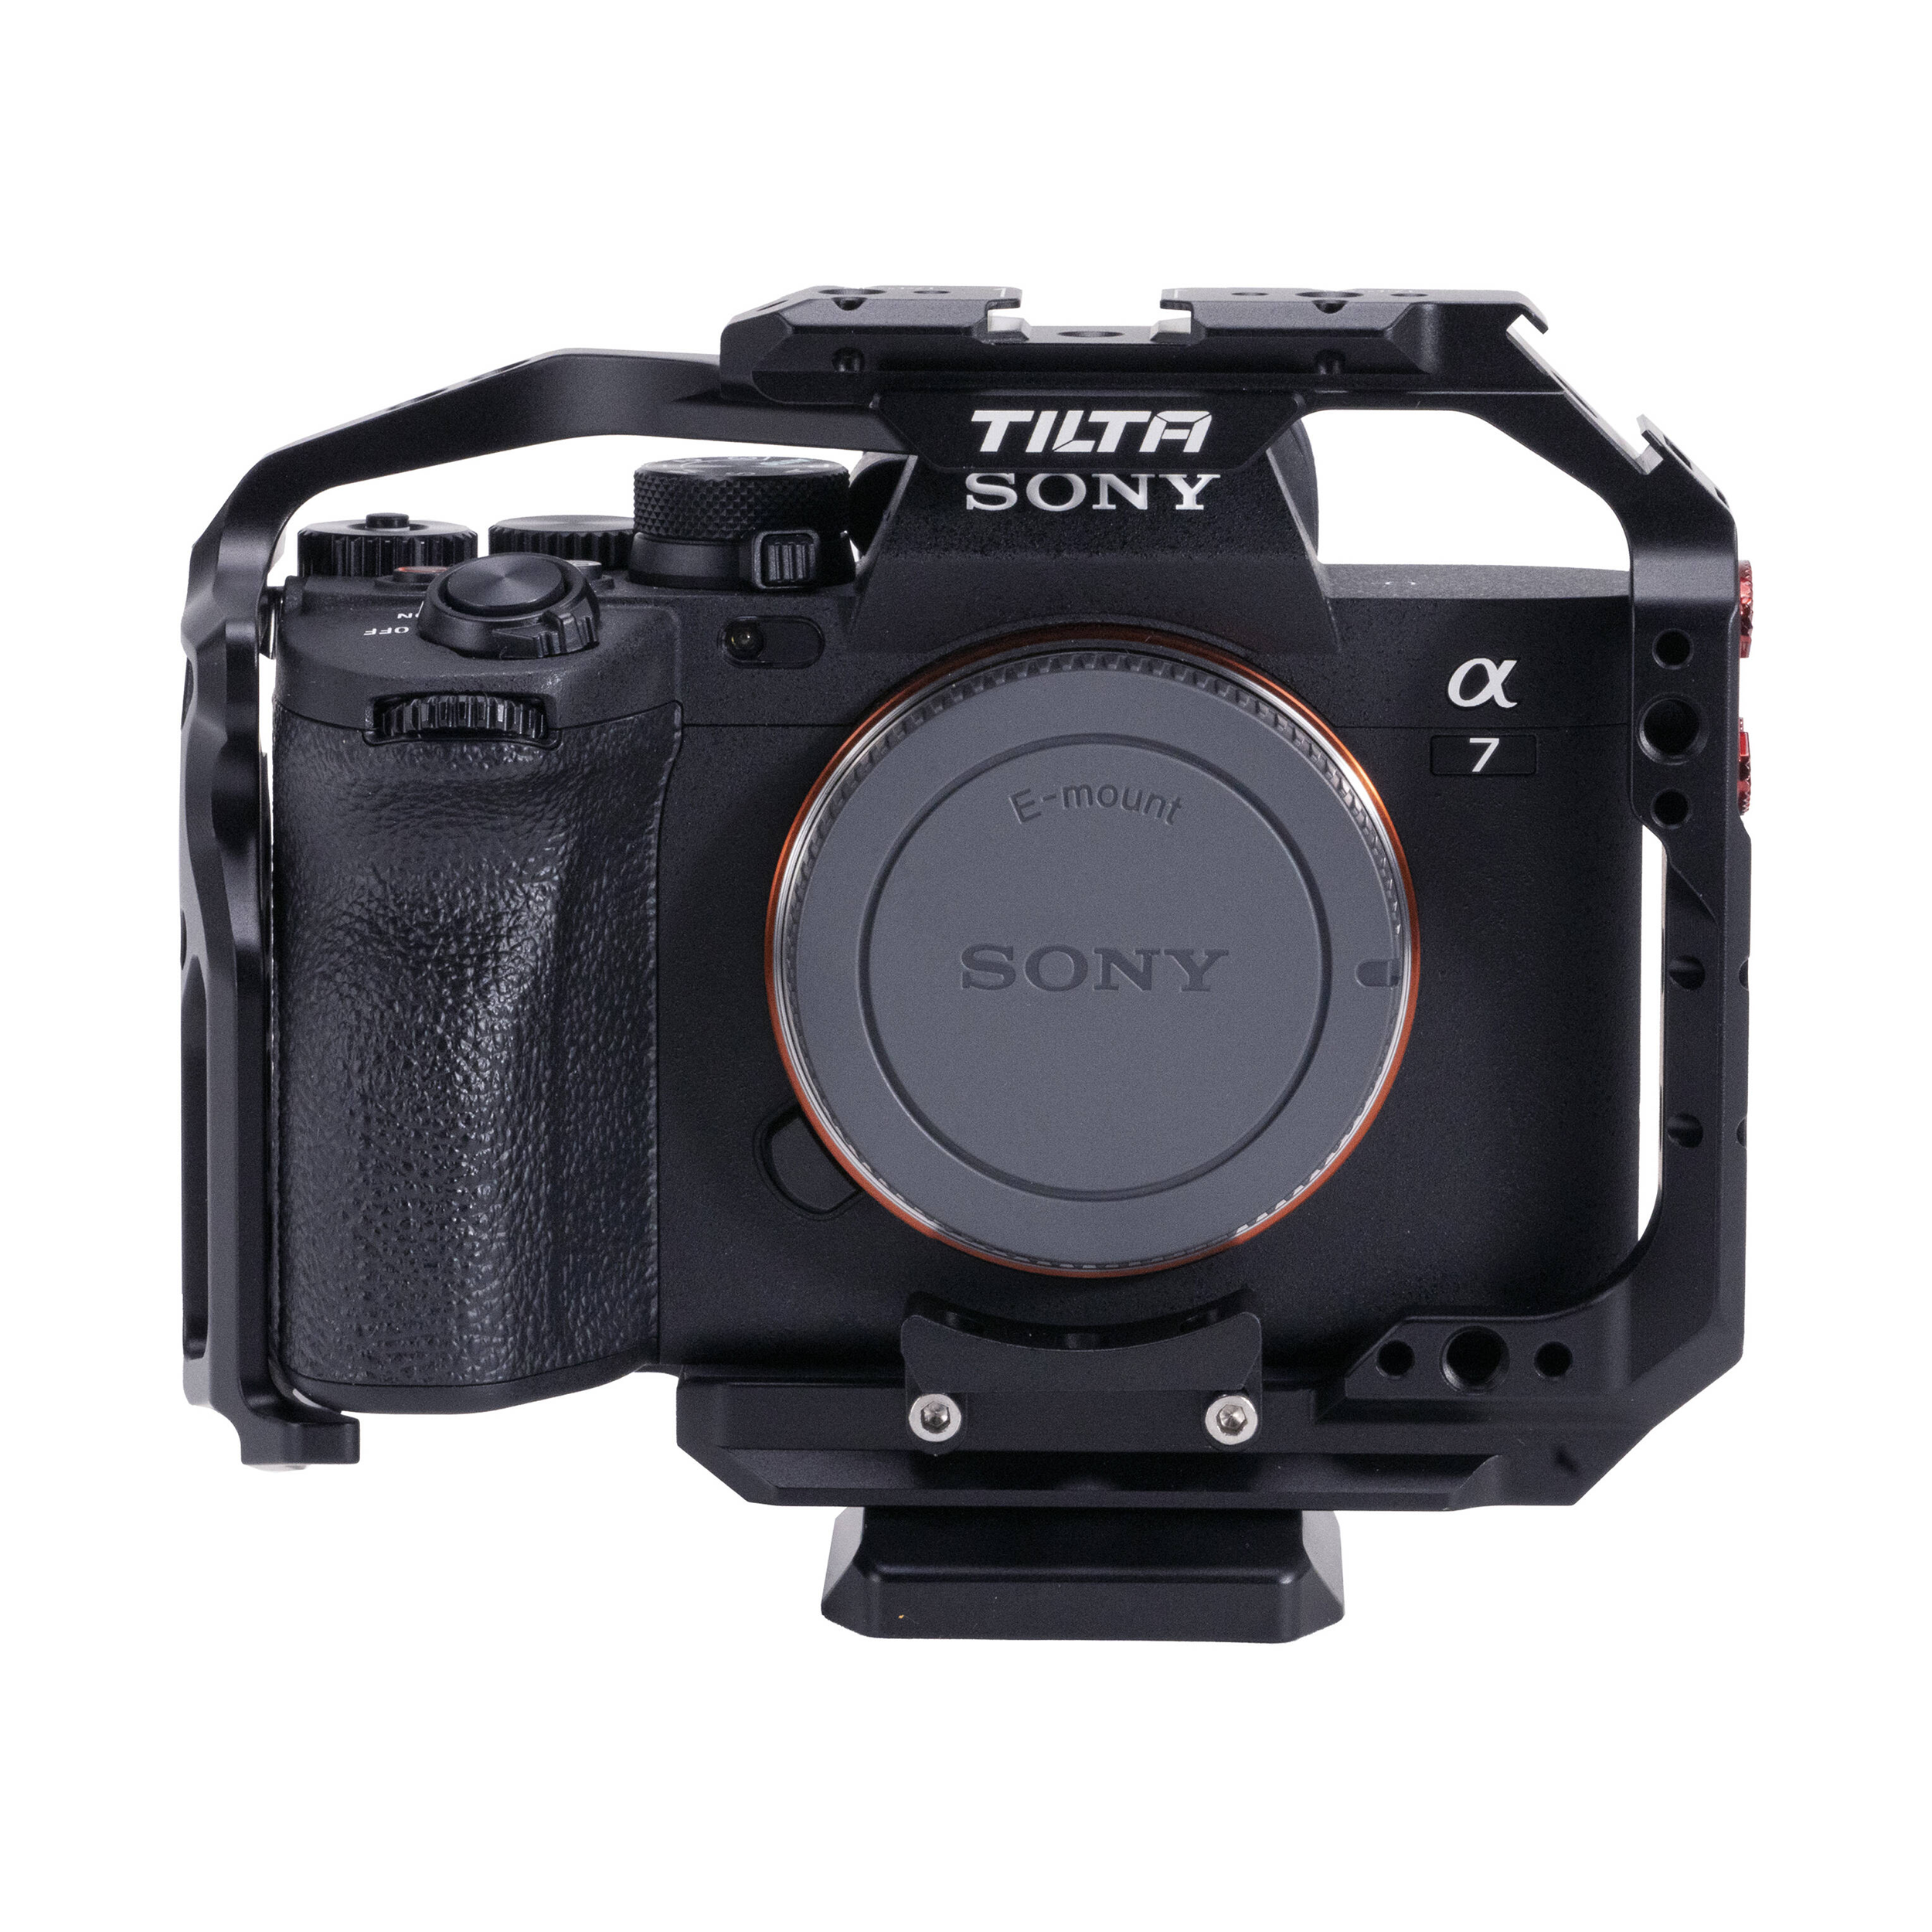 Tilta Full Camera Cage for Sony a7 IV & Select Cameras - Black